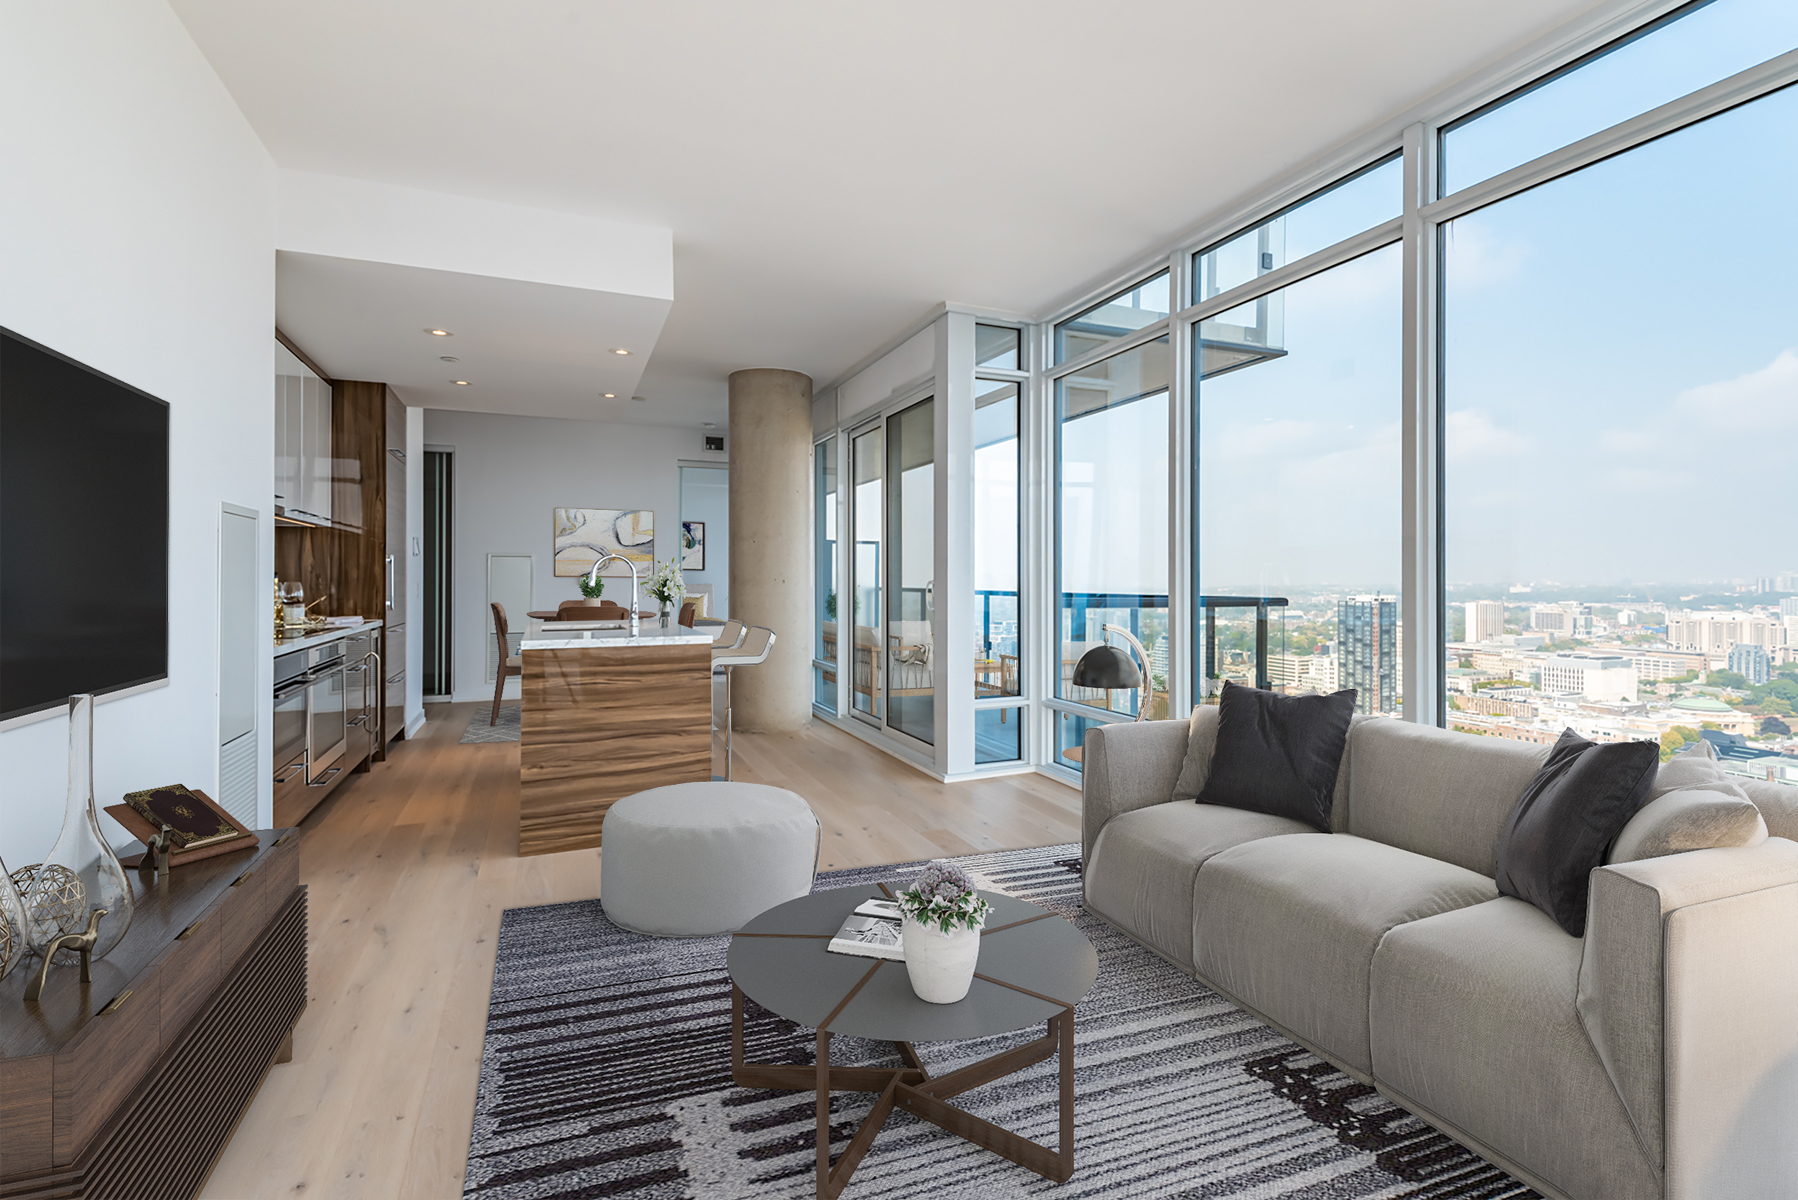 Condo with floor-to-ceiling windows and view of Toronto.